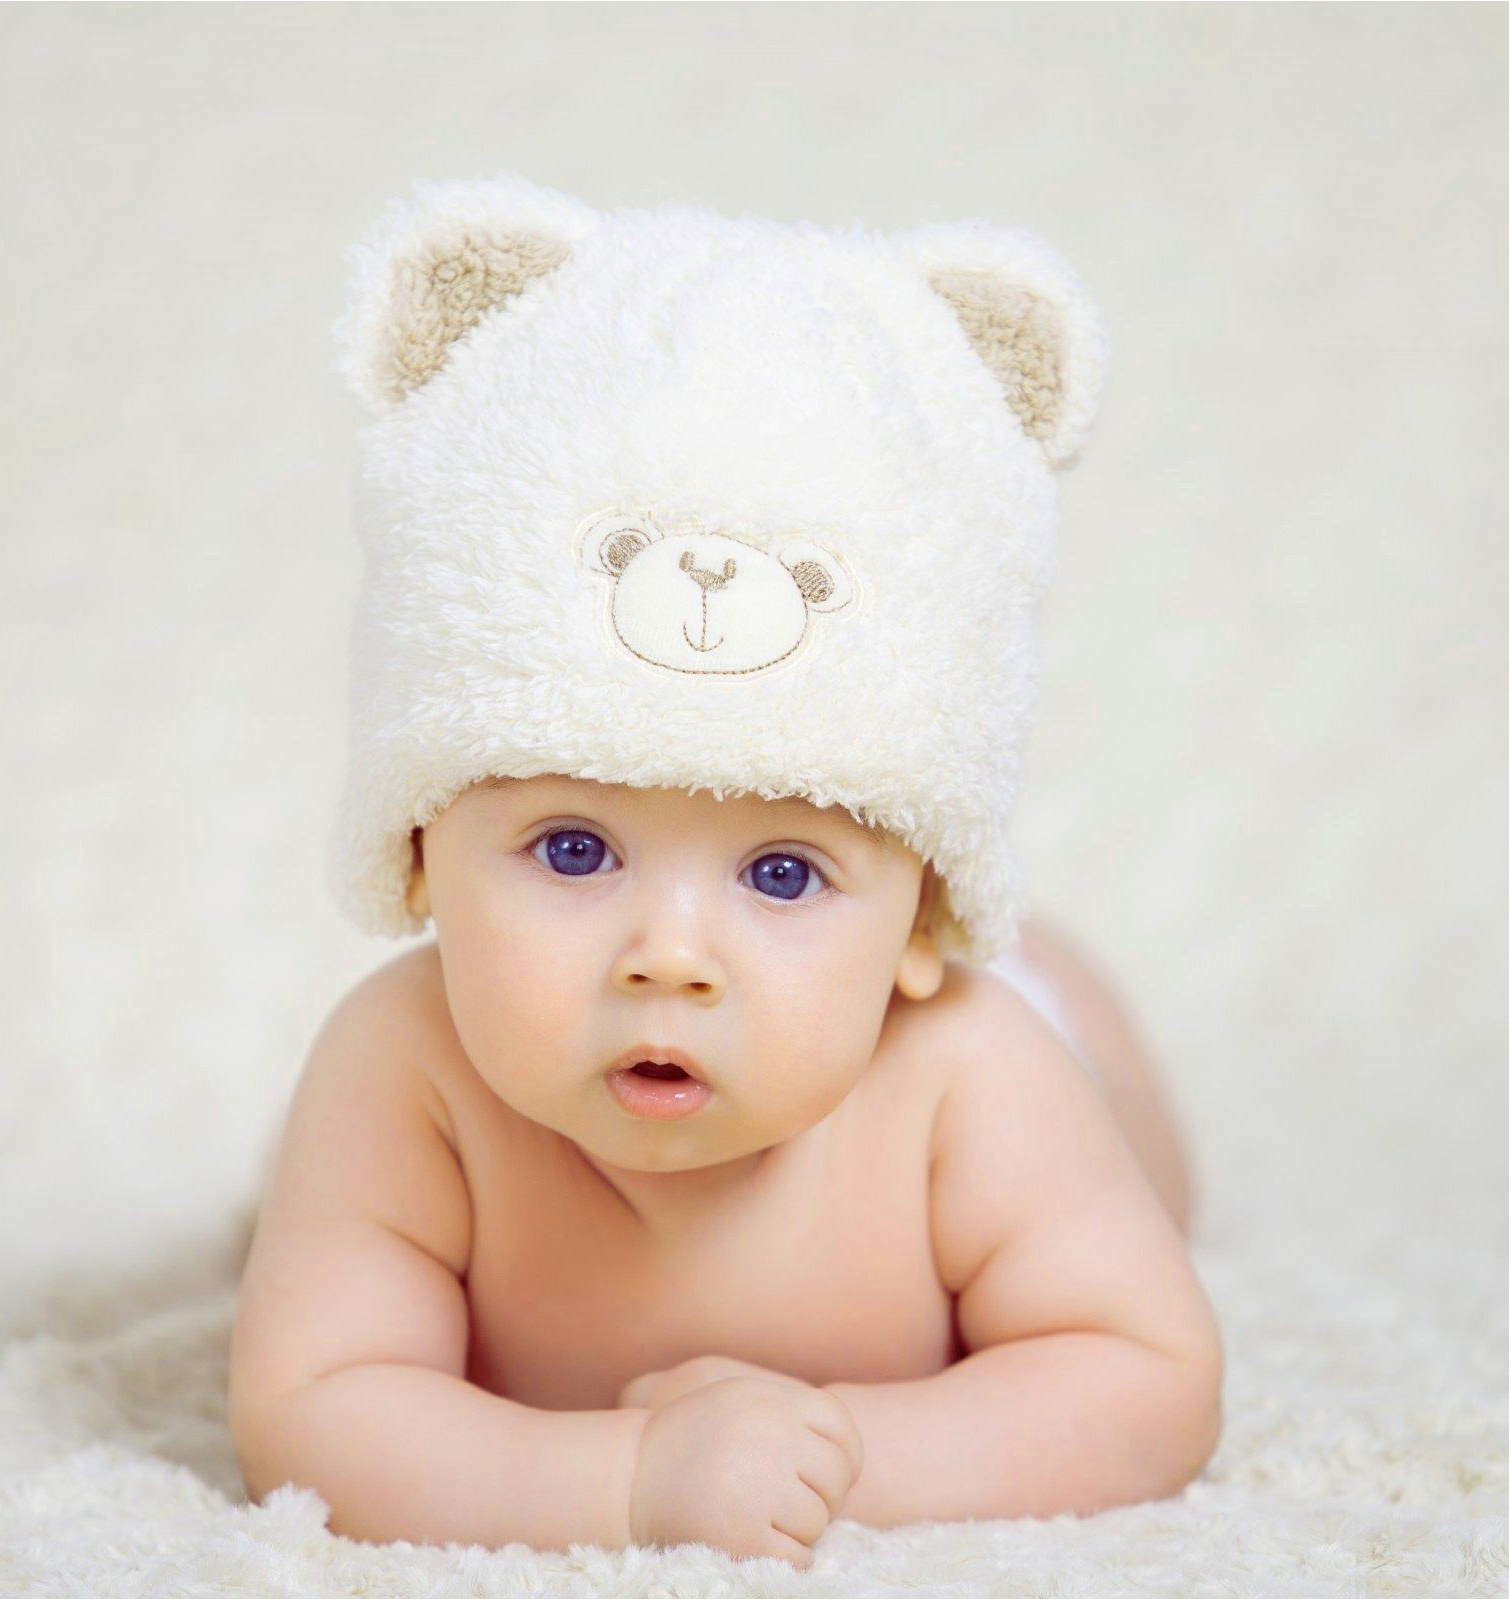 Cute Baby Boy Images Wallpaper Pictures Download - Good Morning Cute Baby , HD Wallpaper & Backgrounds